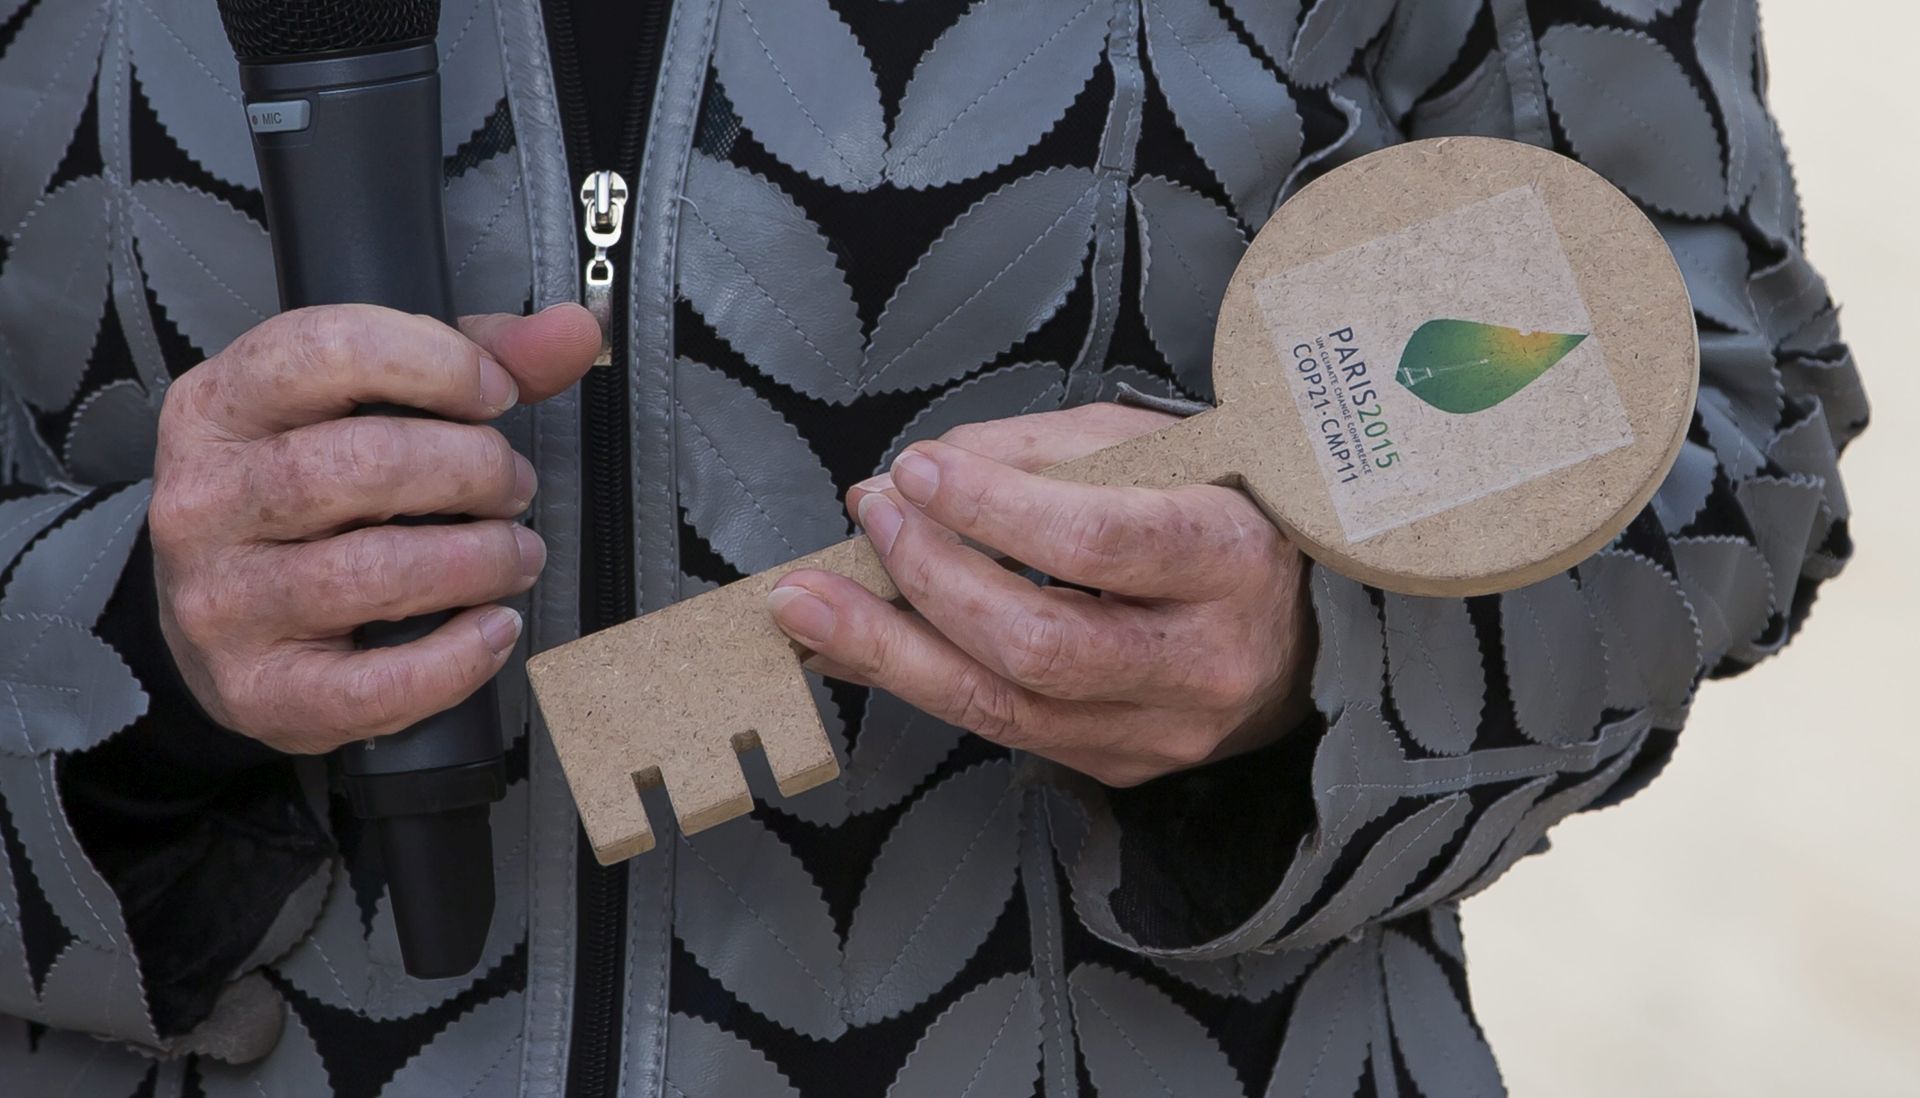 epa05045817 A closeup view of the symbolic key to the conference, handed by French Foreign Minister and acting President of COP21 Laurent Fabius to Executive Secretary of the UN Framework Convention on Climate Change (UNFCCC) Christiana Figueres during an official key hand-over ceremony, held at the COP21 World Climate Change Conference 2015 in Le Bourget, north of Paris, France, 28 November 2015.  The 21st Conference of the Parties (COP21) due to be held in Paris from 30 November to 11 December will proceed as planned, despite the terrorist attacks of 13 November. US President Barack Obama, German Chancellor Angela Merkel as well as leaders from India, South Africa and China are among the leaders planning to come. The aim is to reach an international agreement to limit greenhouse gas emissions and curtail climate change.  EPA/IAN LANGSDON